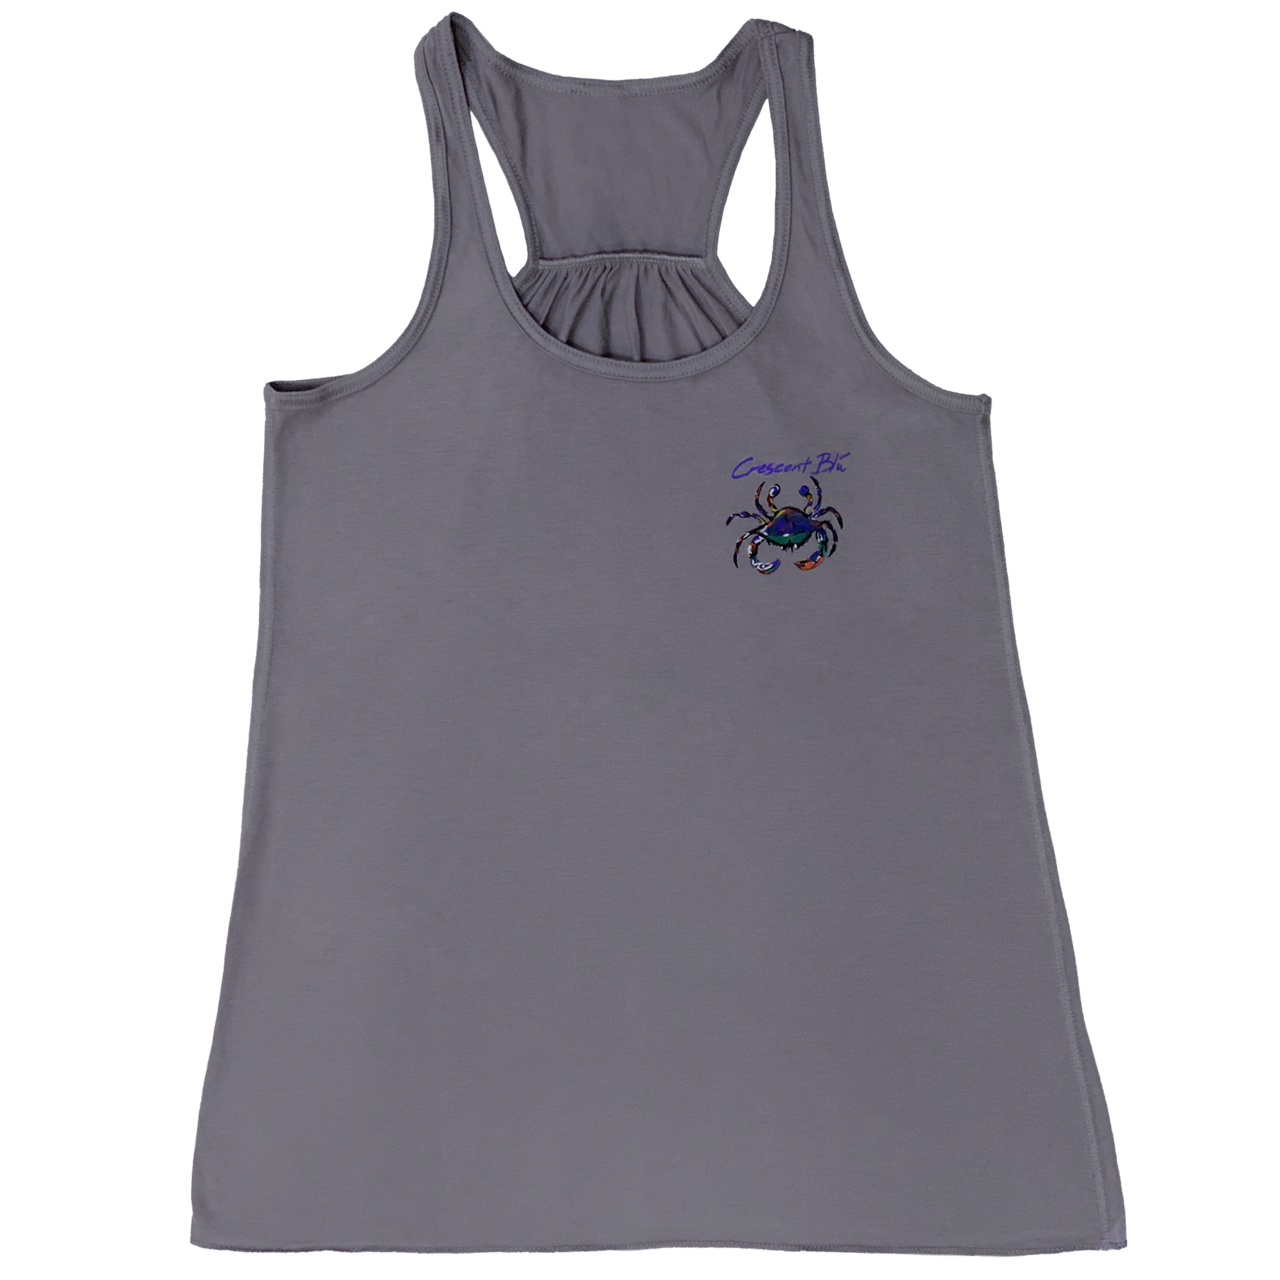 Front view of Grey Racerback Ladies tank top with small multi-colored Crescent Blu Signature Crab logo on the front left chest